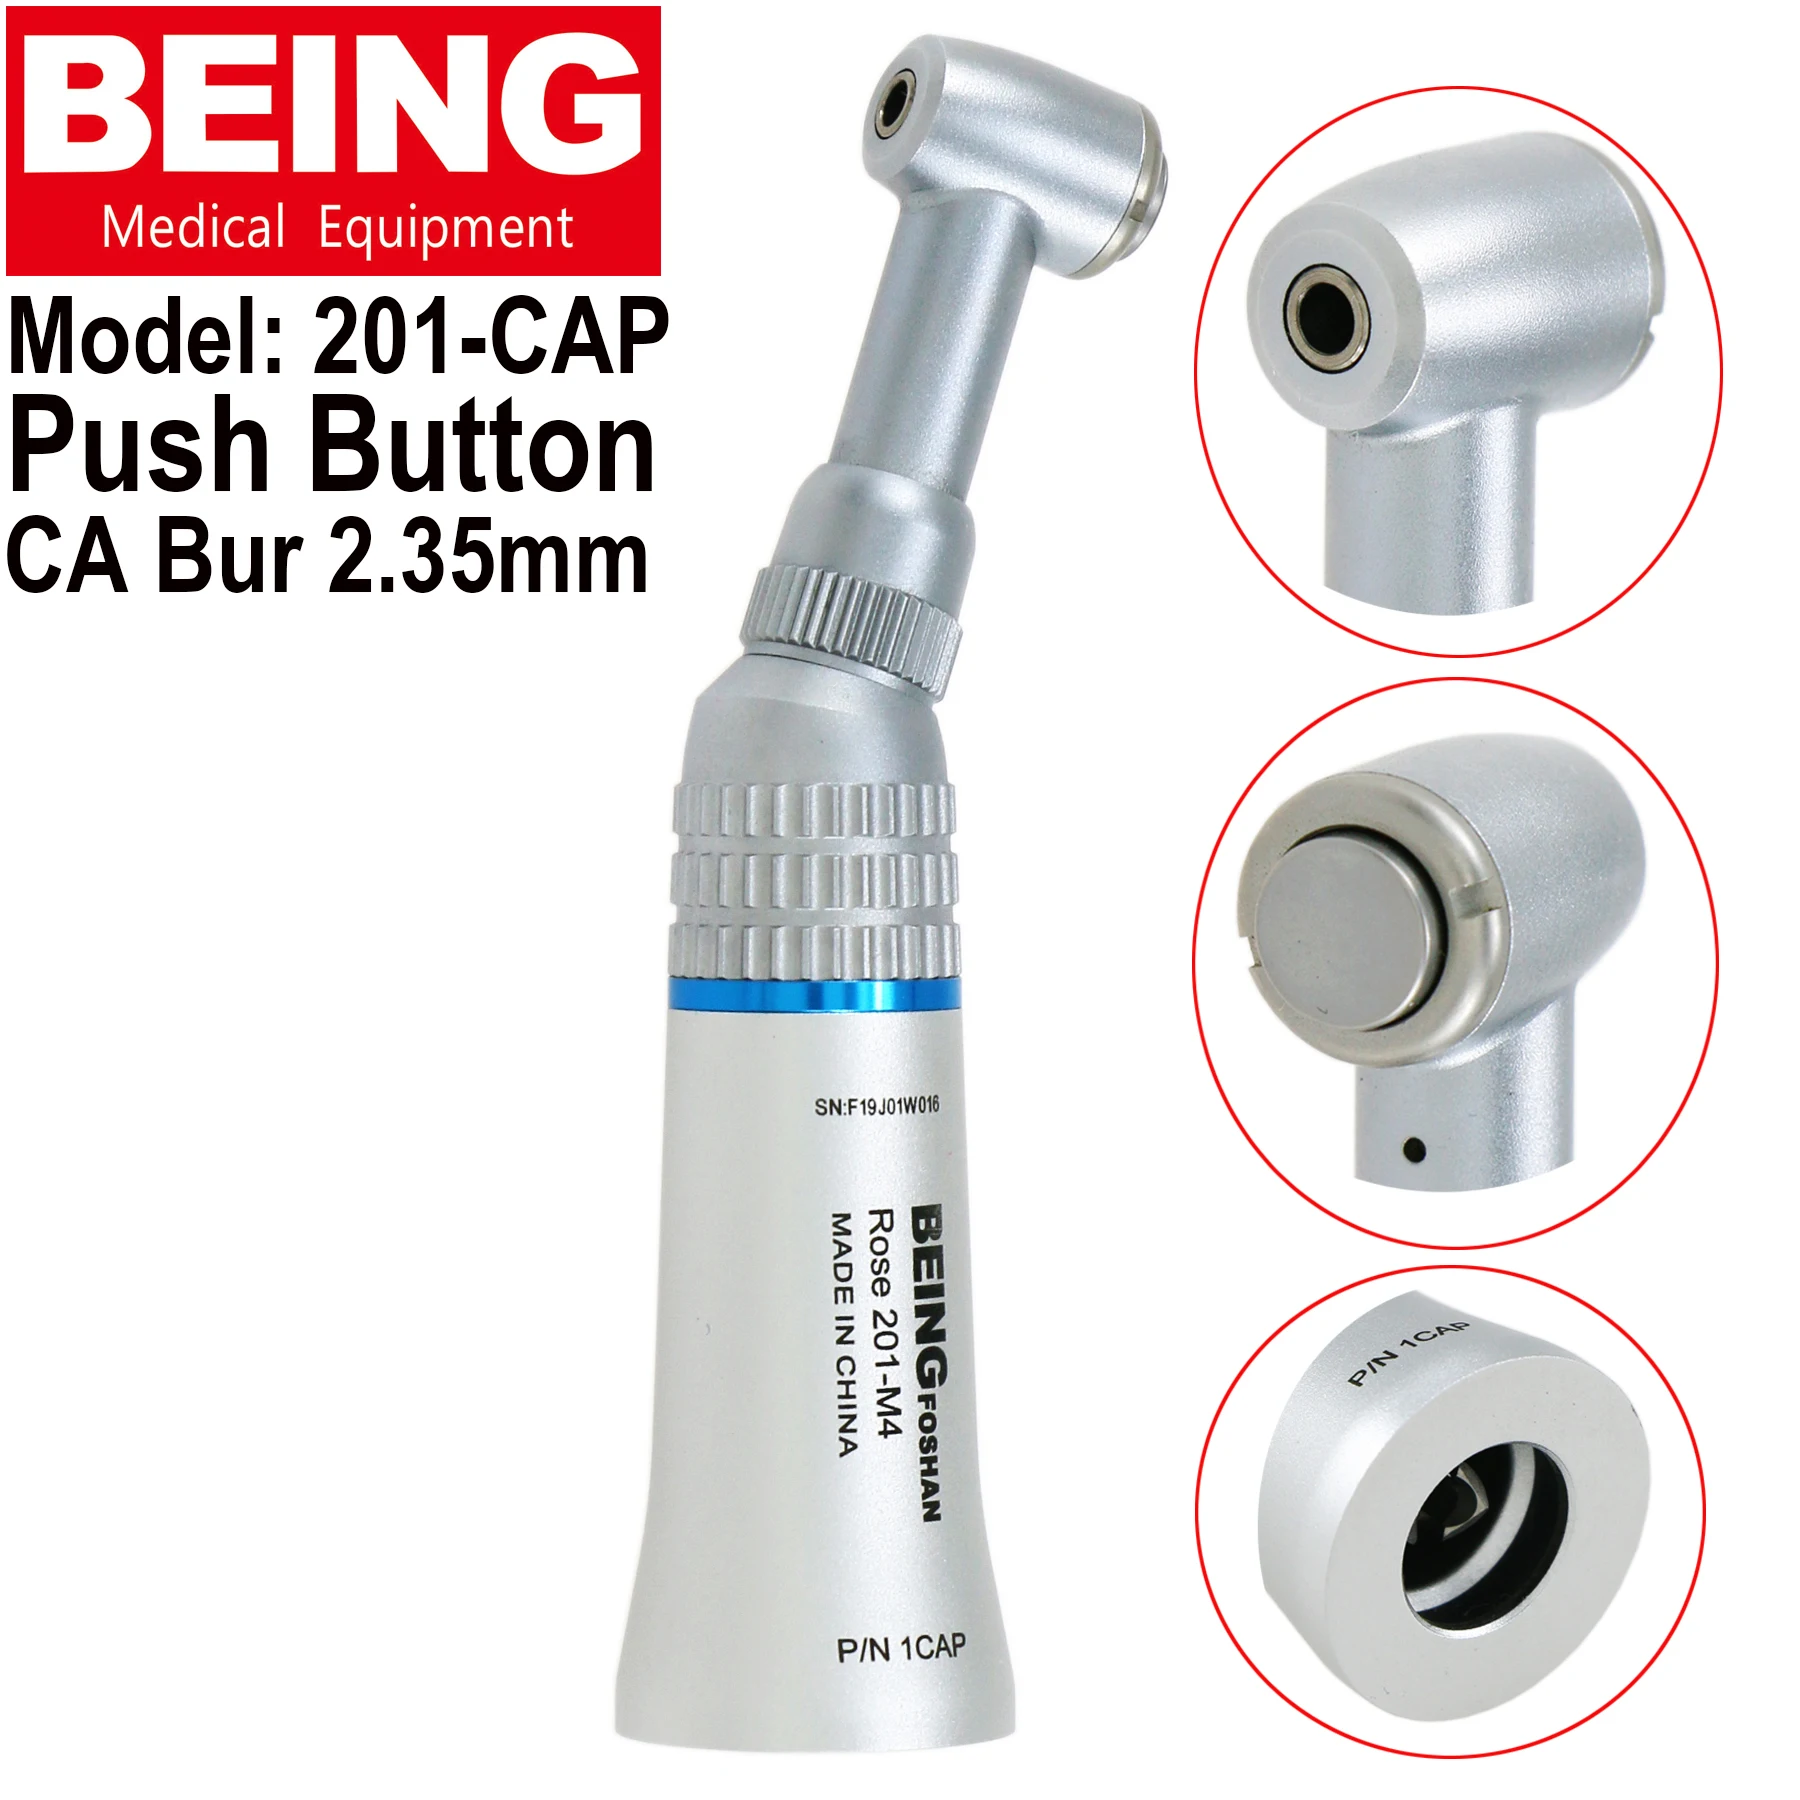 BEING Dental 1:1 Low Speed Contra Angle Straight Nose Cone Handpiece Latch Bur 2.35mm FG Bur 1.6mm Air Motor 4Holes Fit KAVO NSK